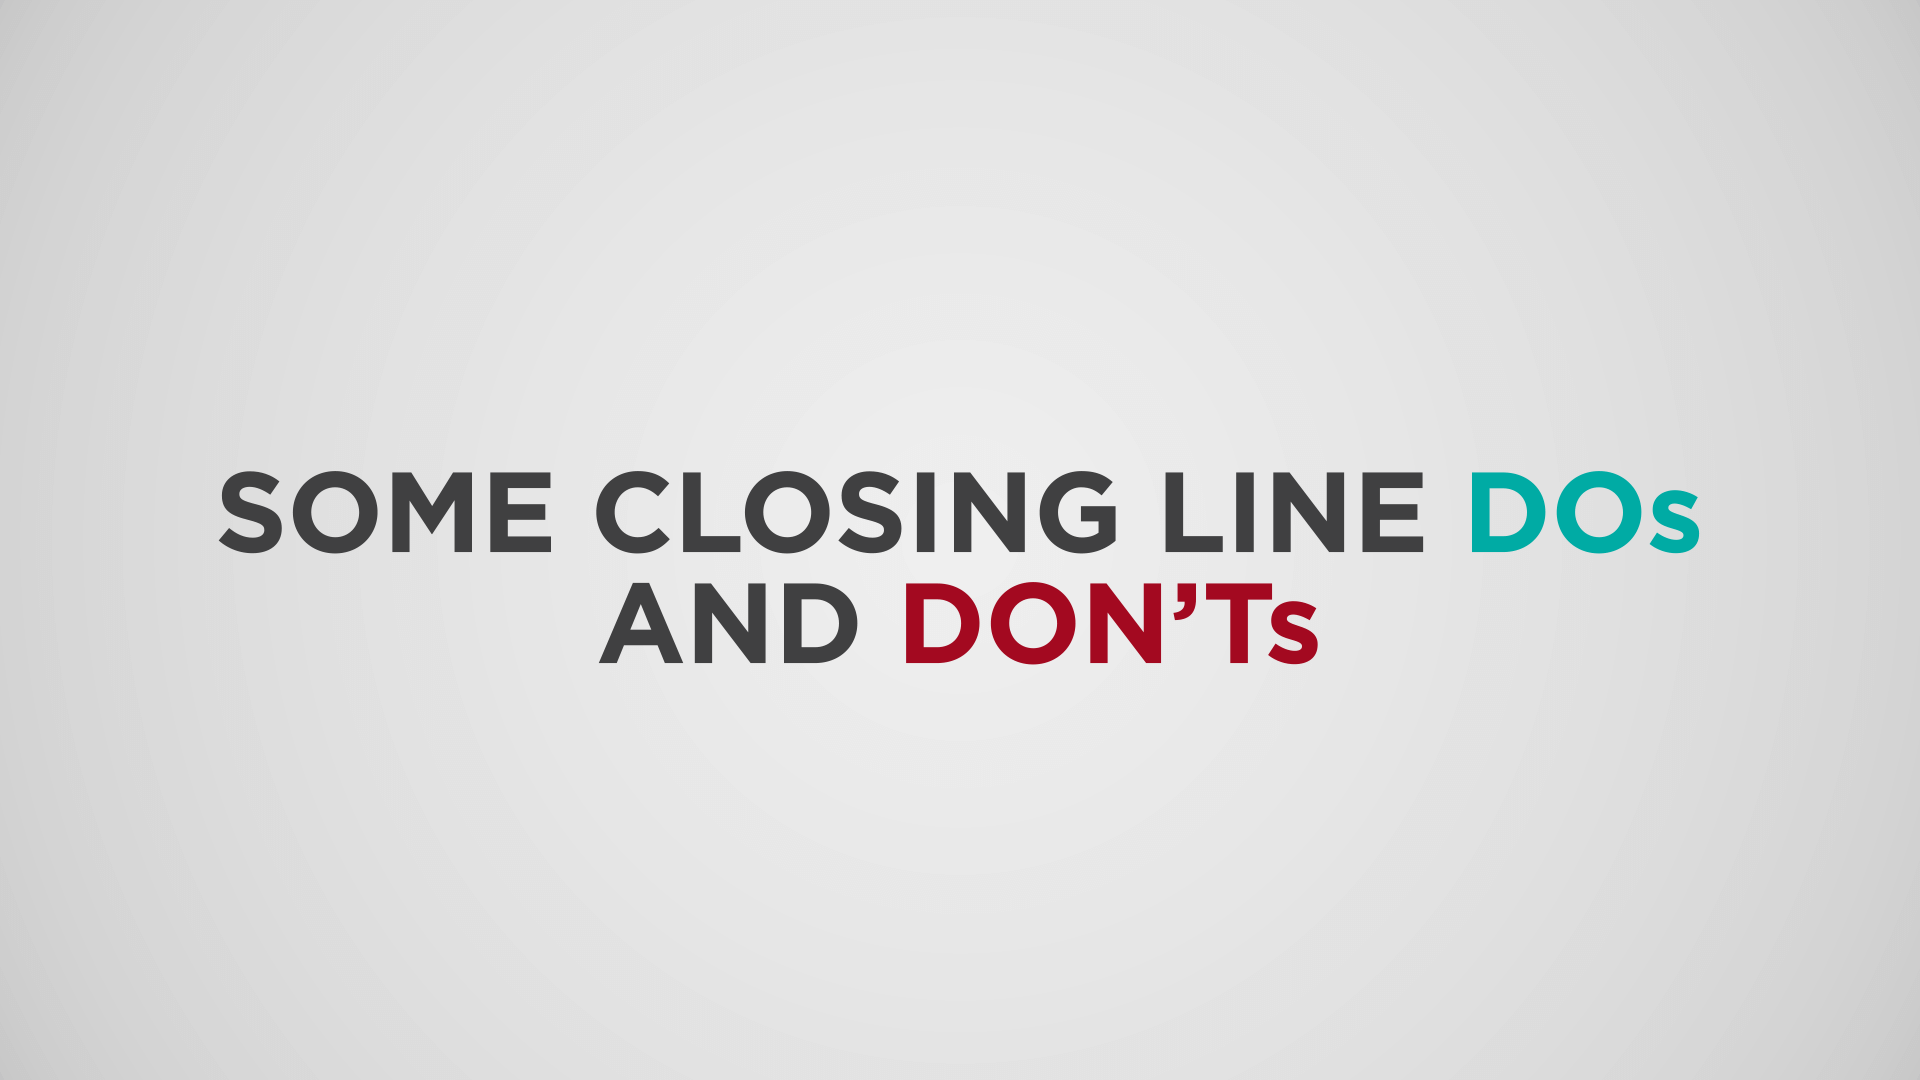 Top 10 College Essay Closing Line Dos and Don’ts